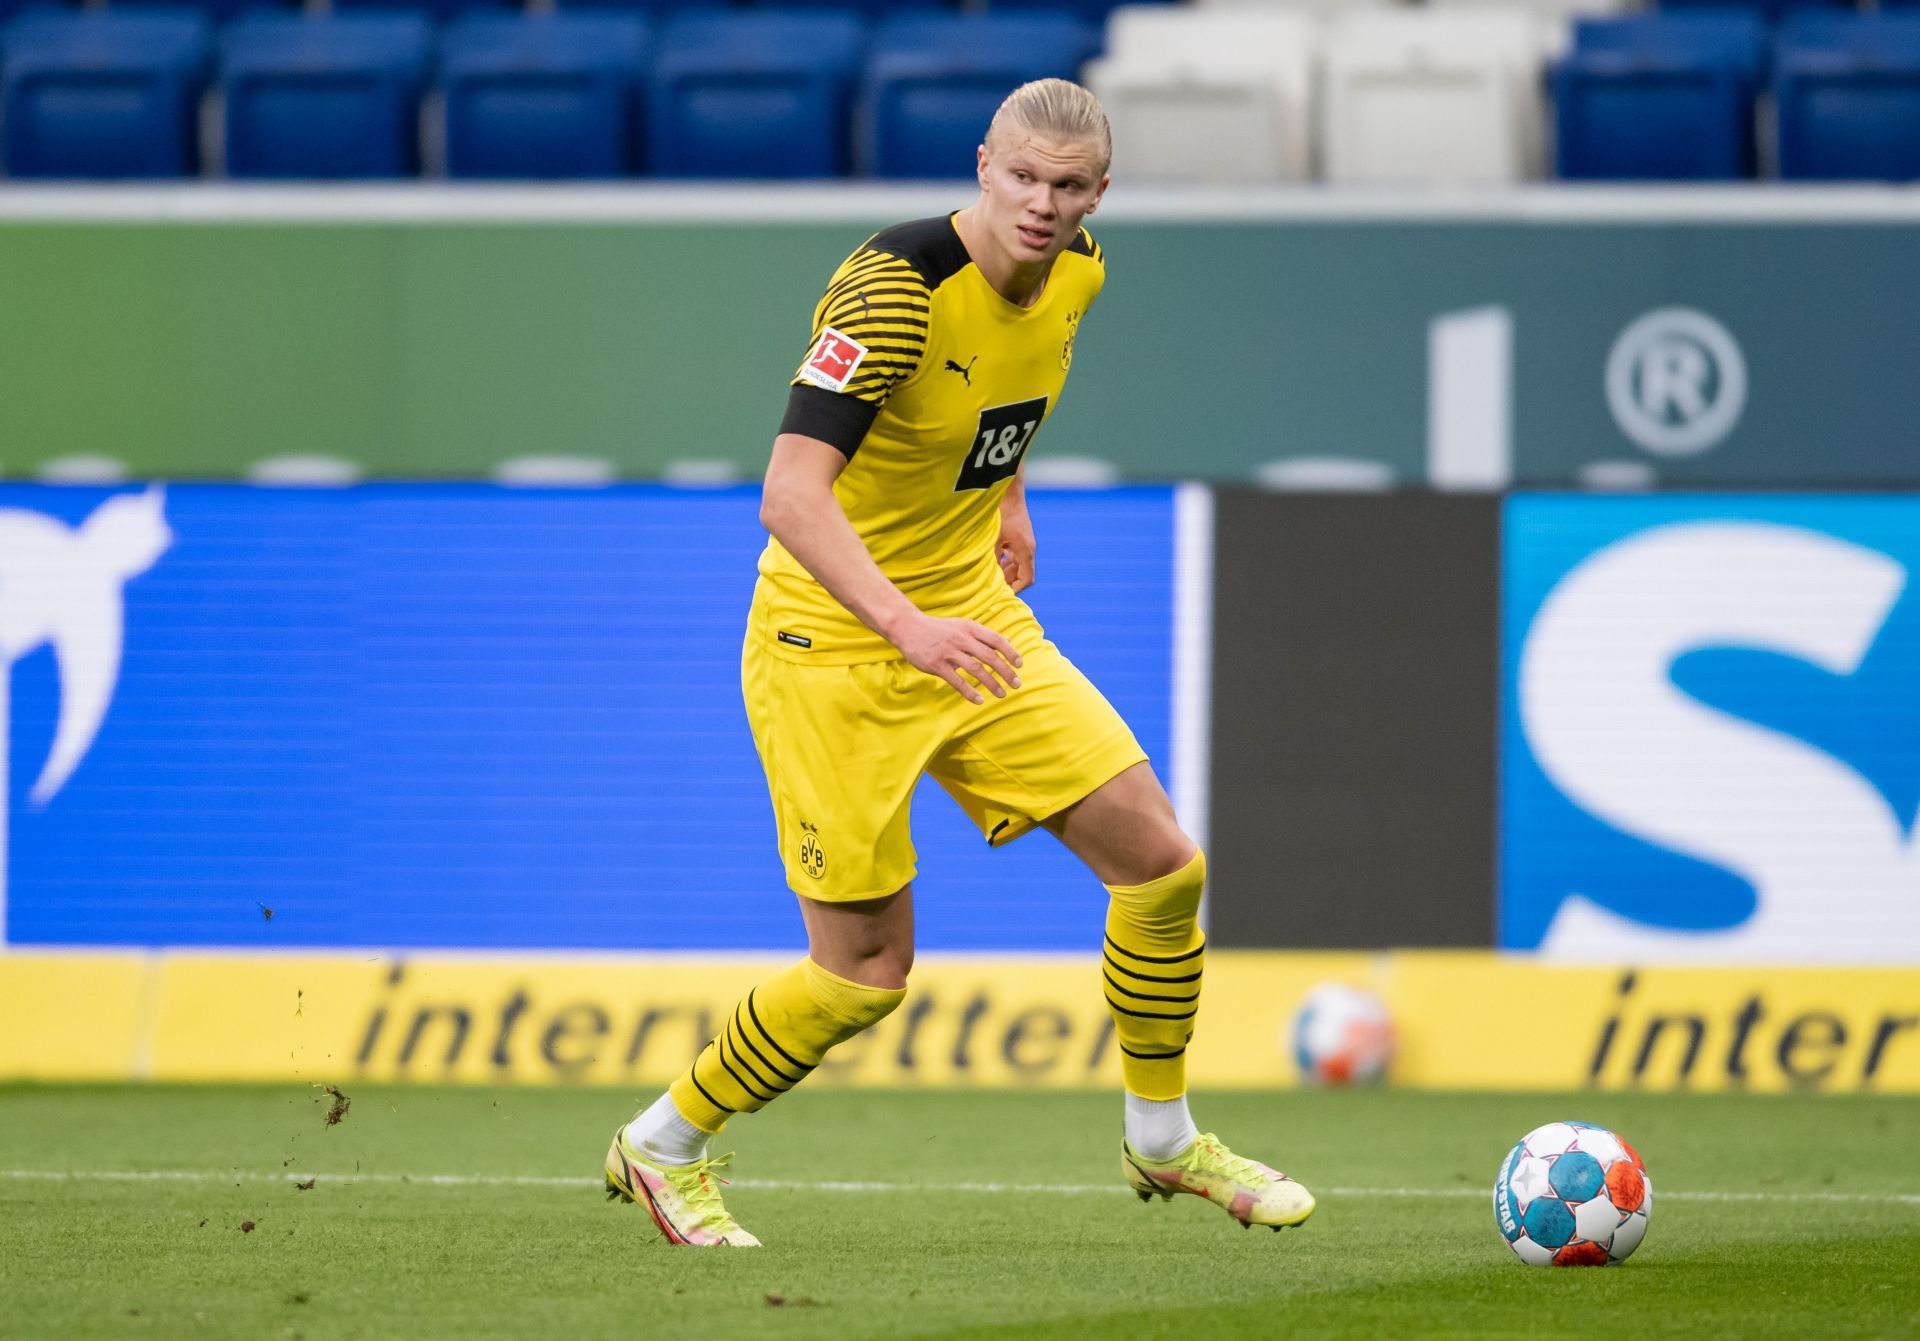 Bayern Munich have entered the race for Erling Haaland.